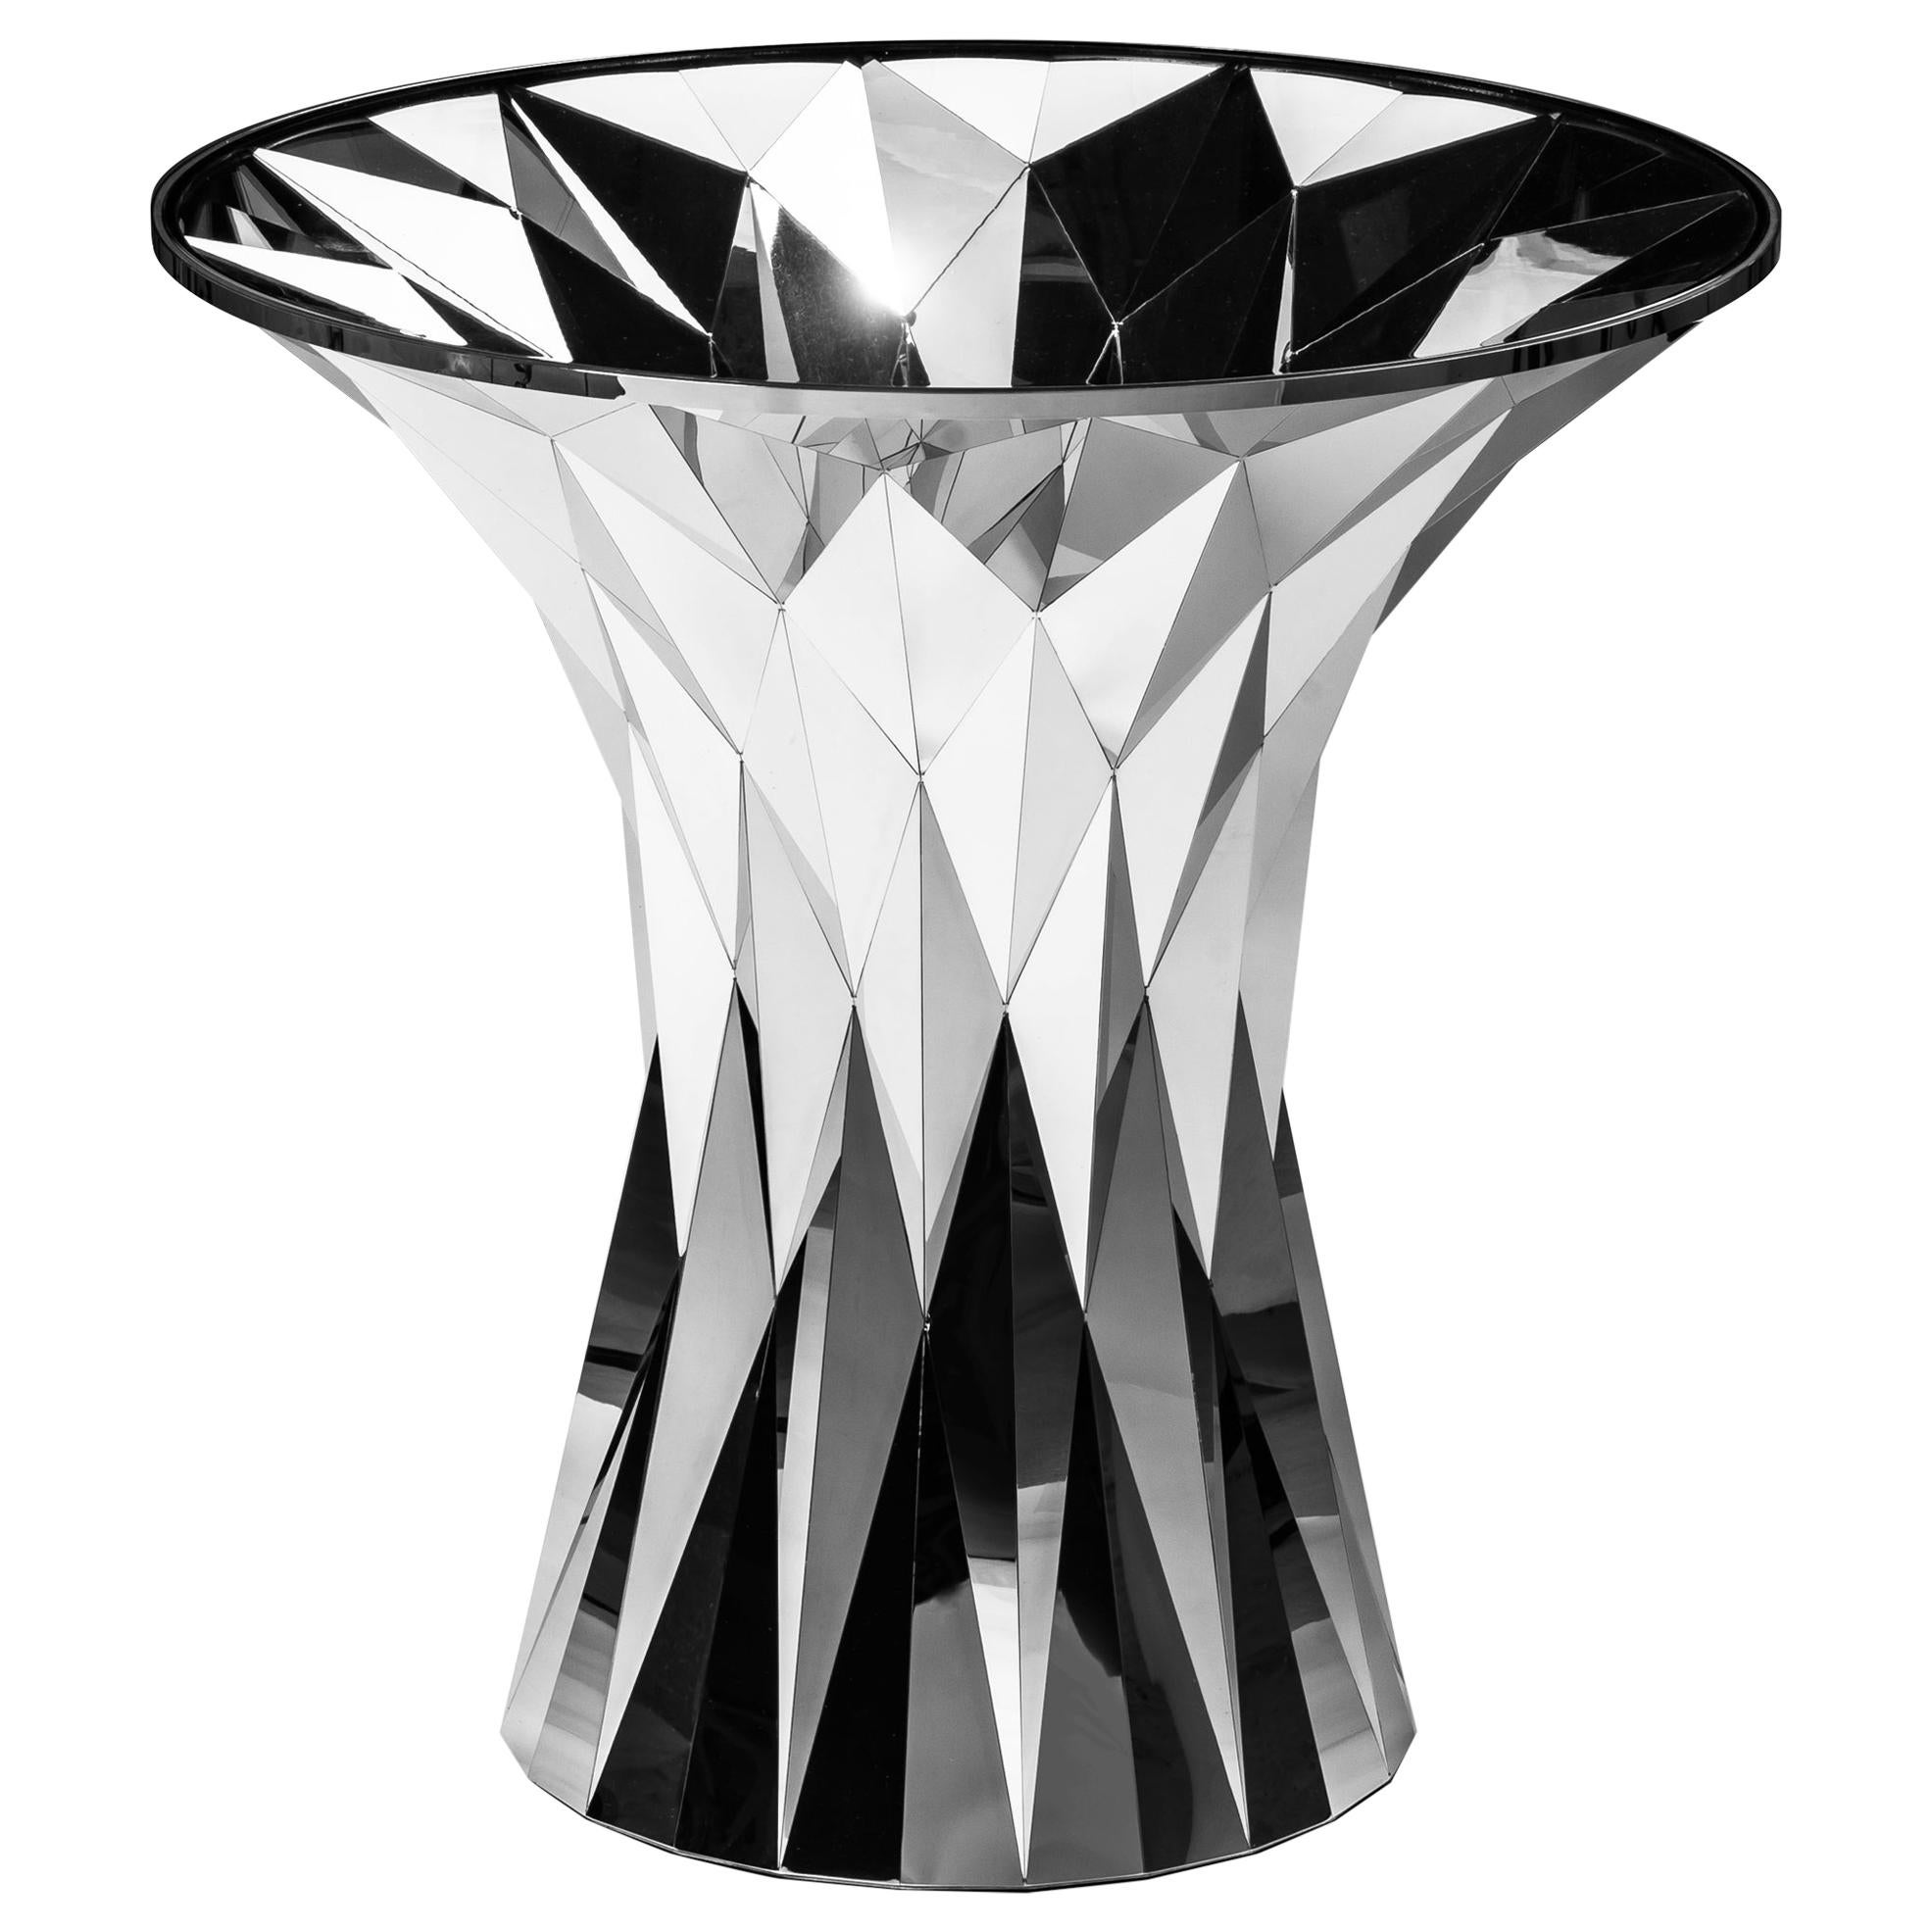 Object #MT-T3-S-S Mirror Polished Stainless Steel Table by Zhoujie Zhang For Sale